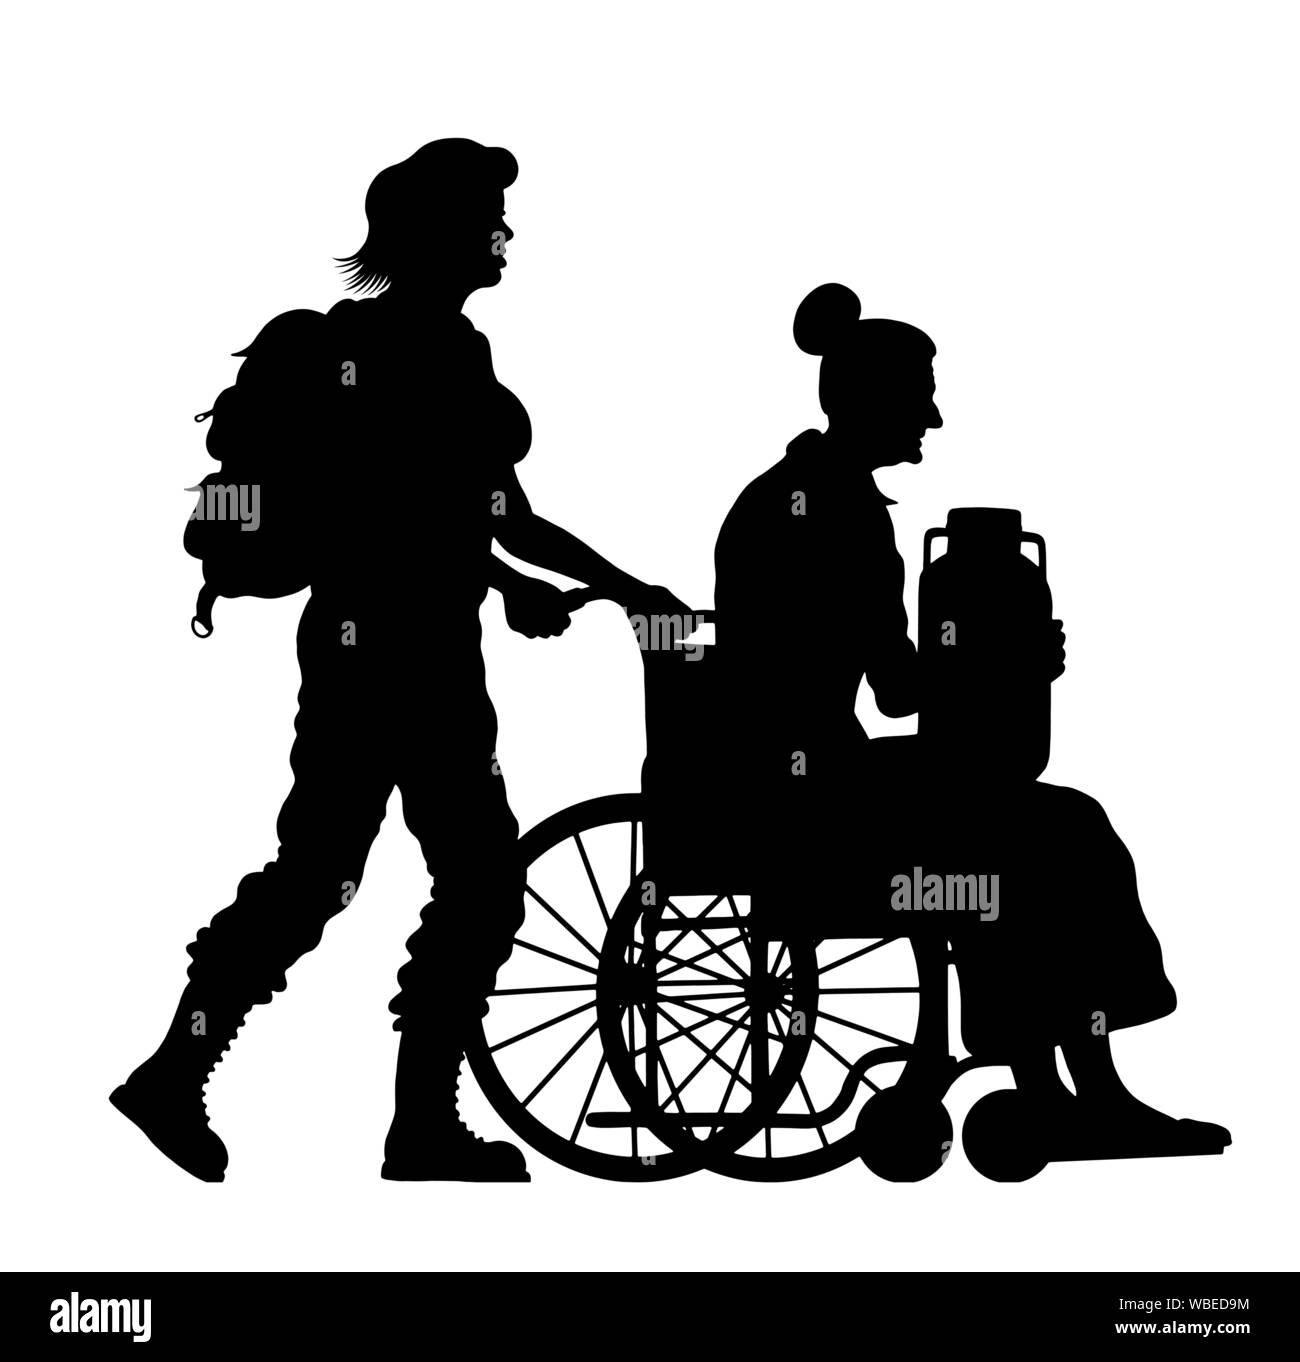 Immigrant old woman on wheelchair and her daughter silhouette. The silhouette objects and background are in different layers. Stock Vector